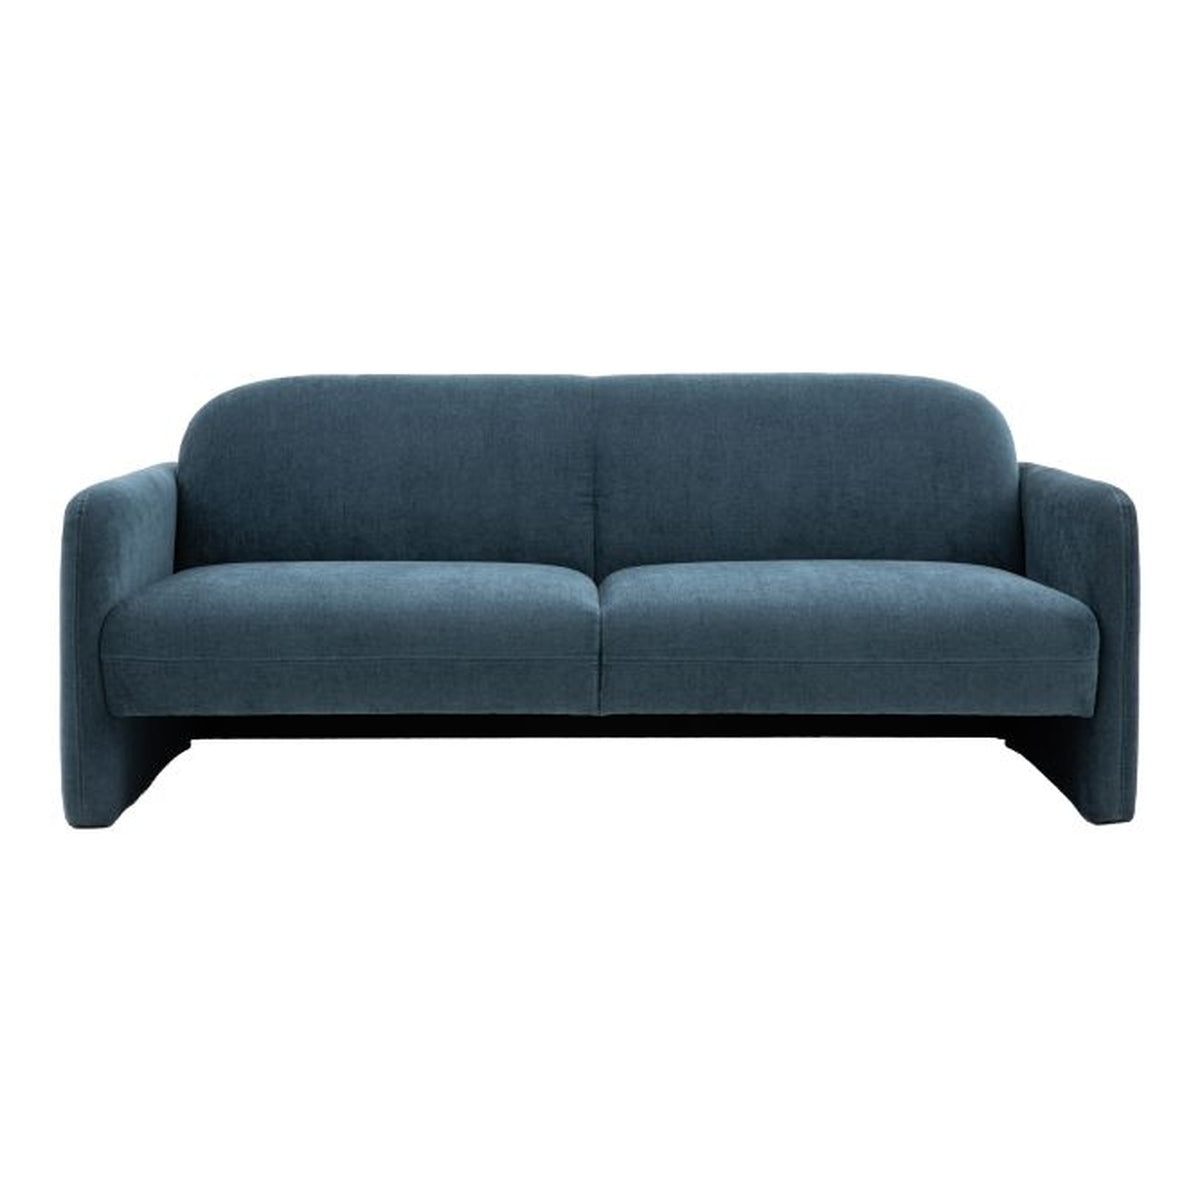 Gallery Interiors Magna 3 Seater Sofa Dusty In Blue